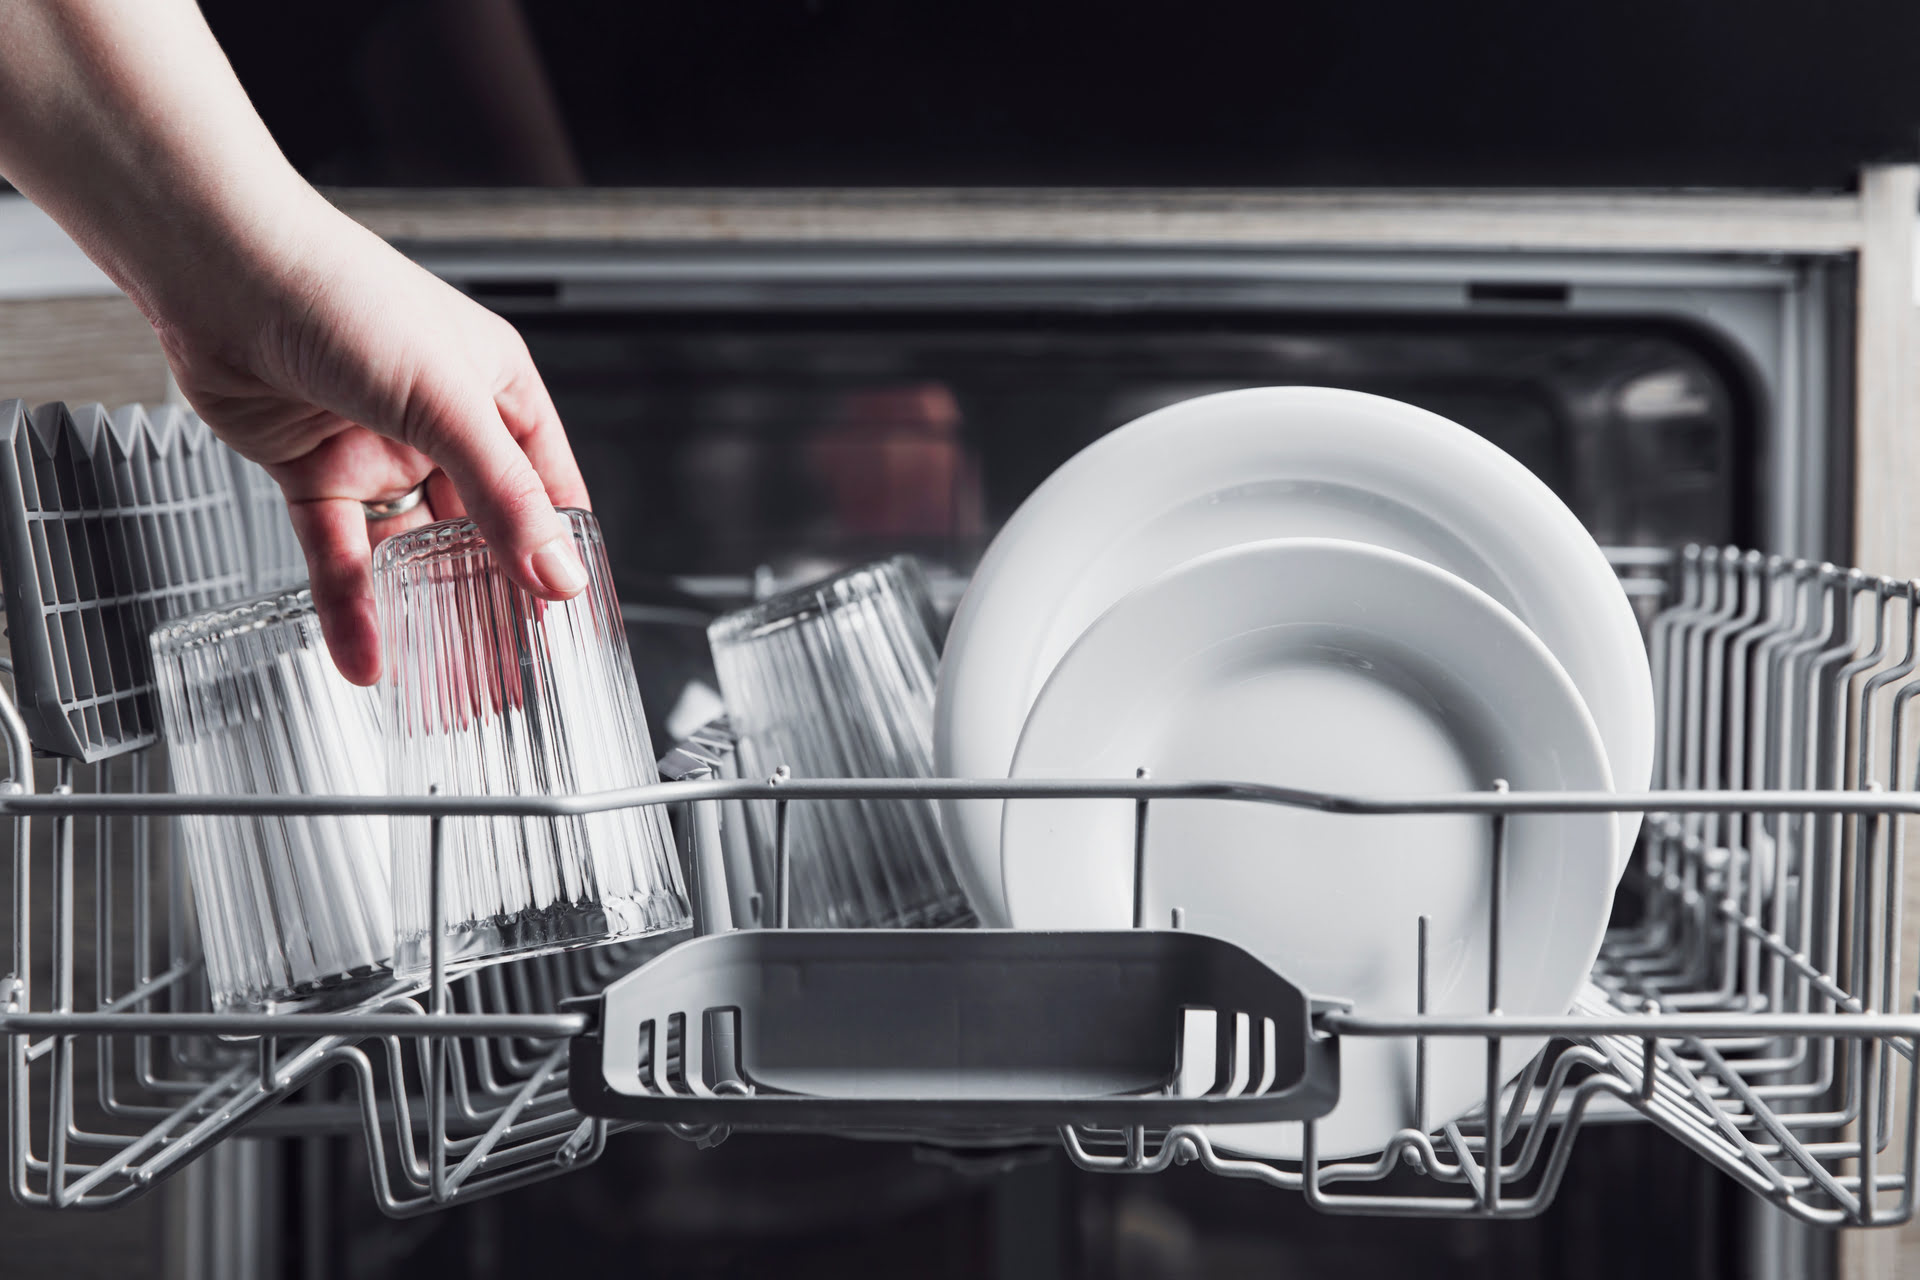 How To Load A Whirlpool Dishwasher